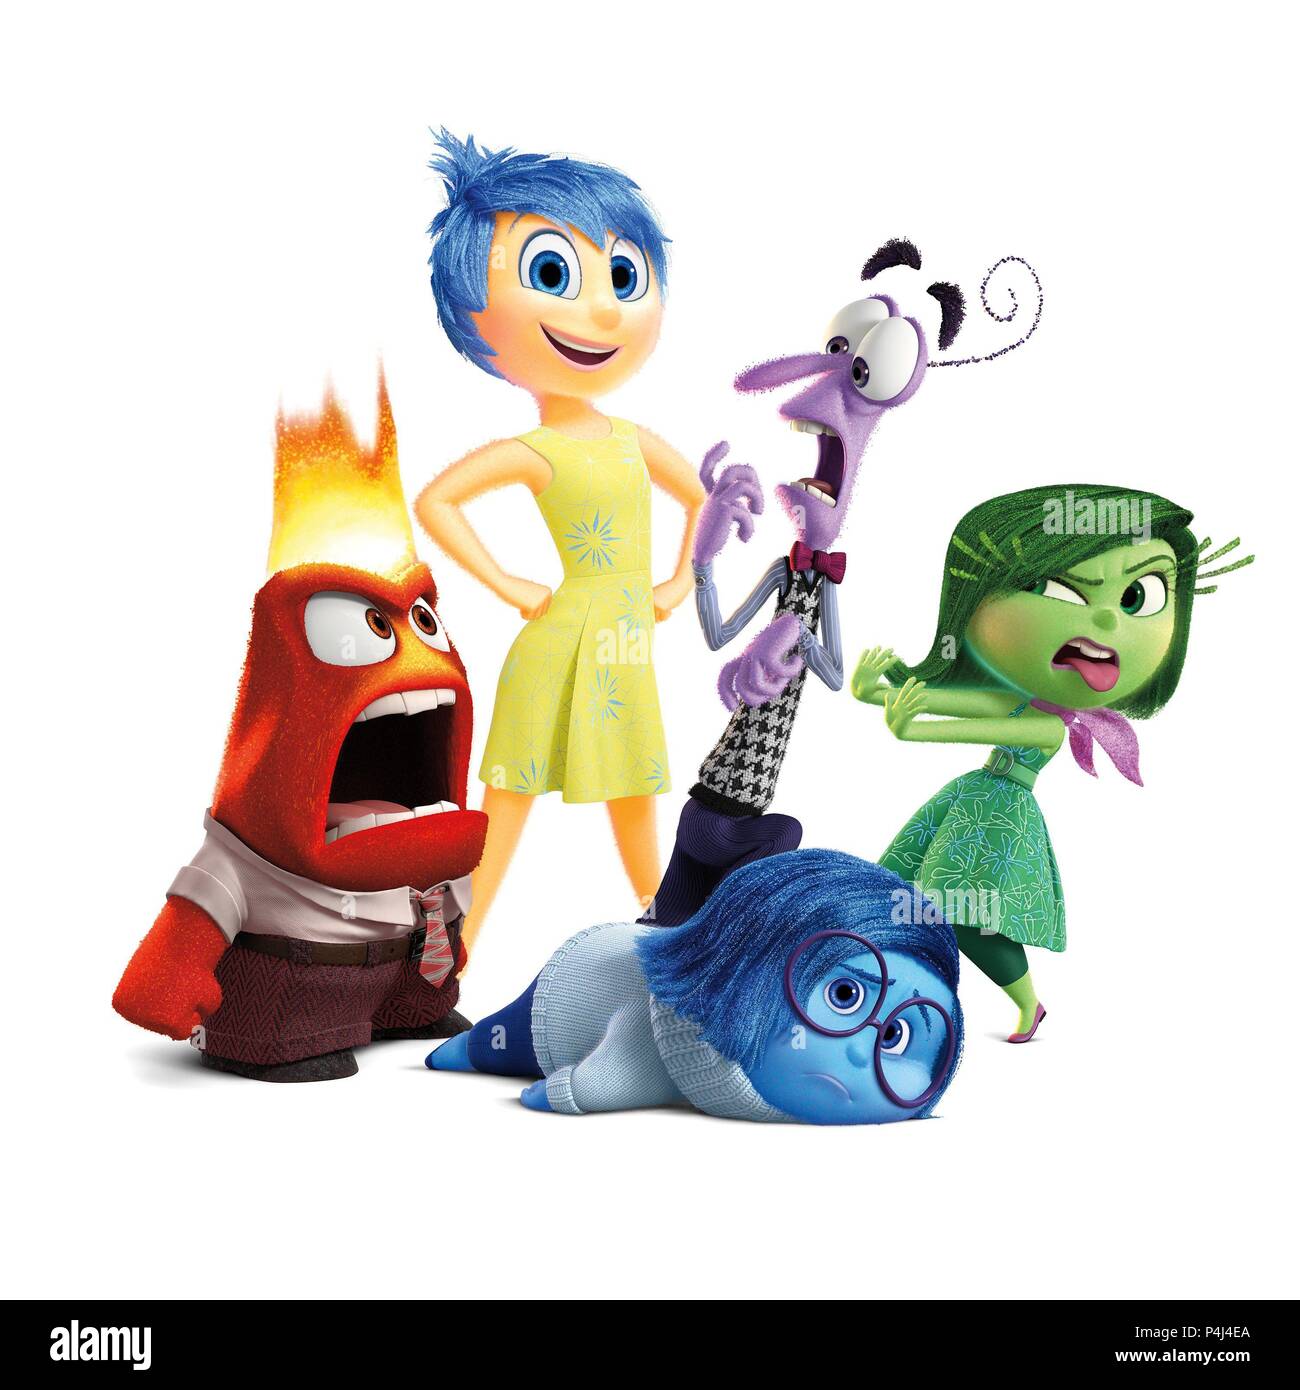 Original Film Title: INSIDE OUT.  English Title: INSIDE OUT.  Film Director: PETE DOCTER.  Year: 2015. Credit: PIXAR ANIMATION STUDIOS/WALT DISNEY PICTURES / Album Stock Photo